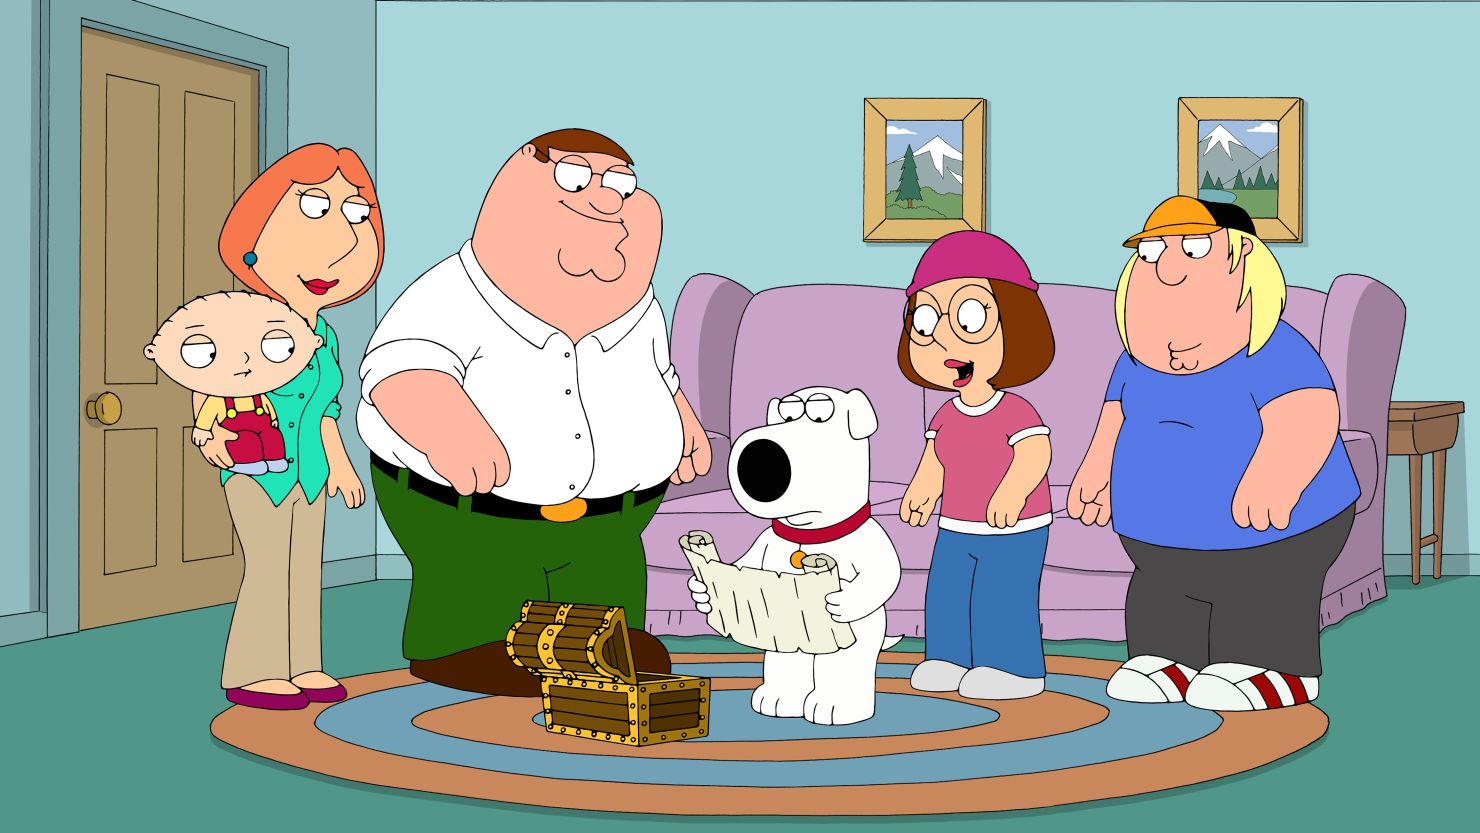 "Family Guy" producers say "the culture is different" since the show premiered 20 years ago.